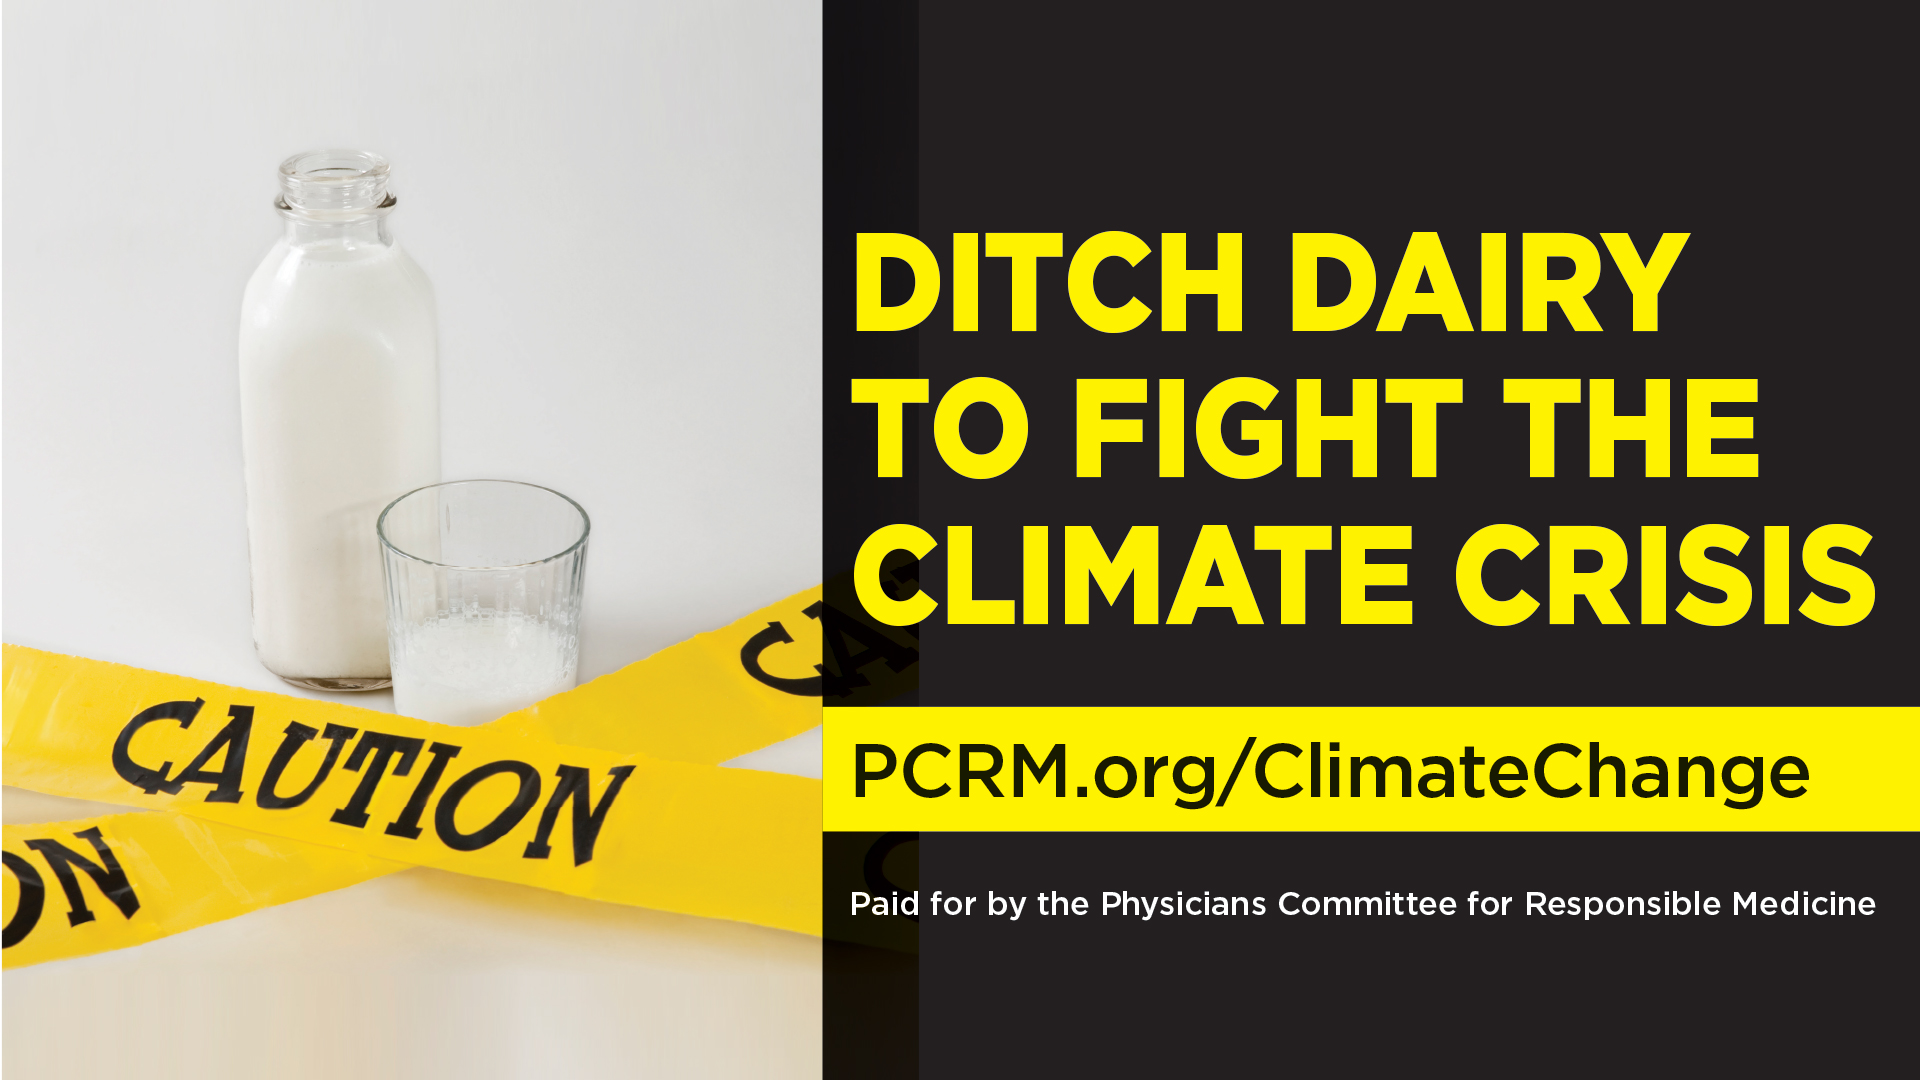 Ditch Dairy to Fight the Climate Crisis